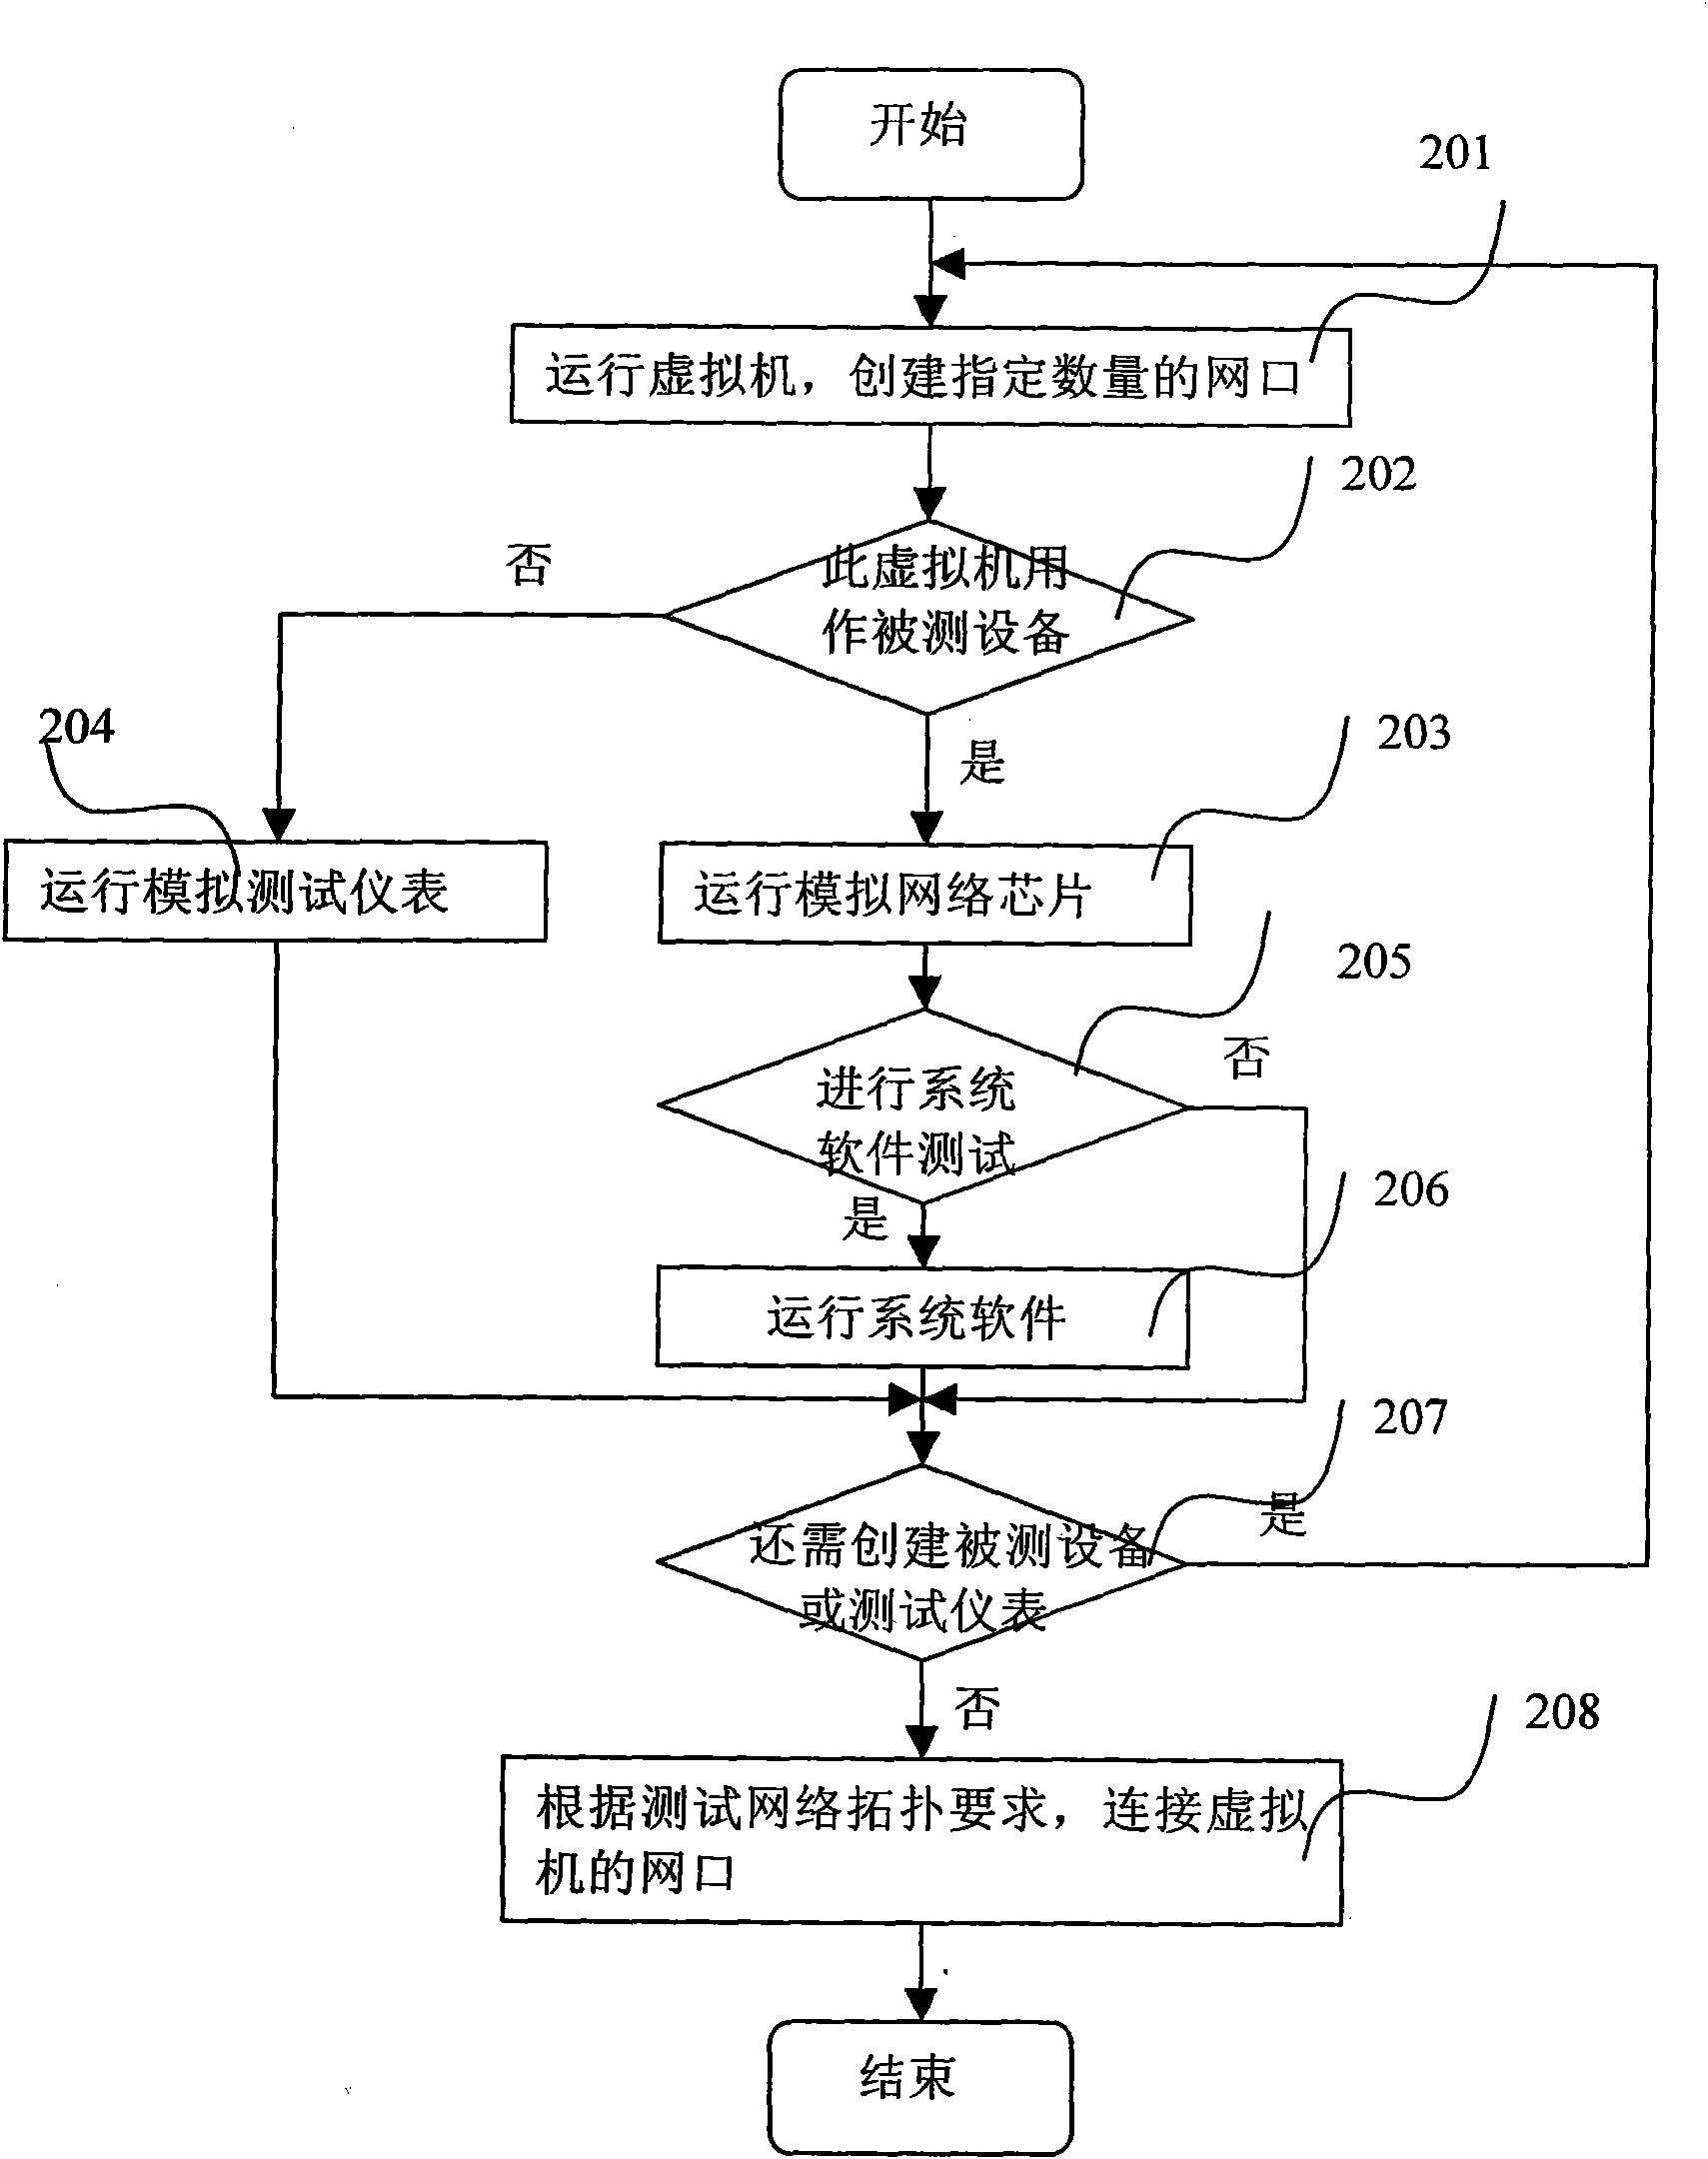 Design method of virtual testing system of network device